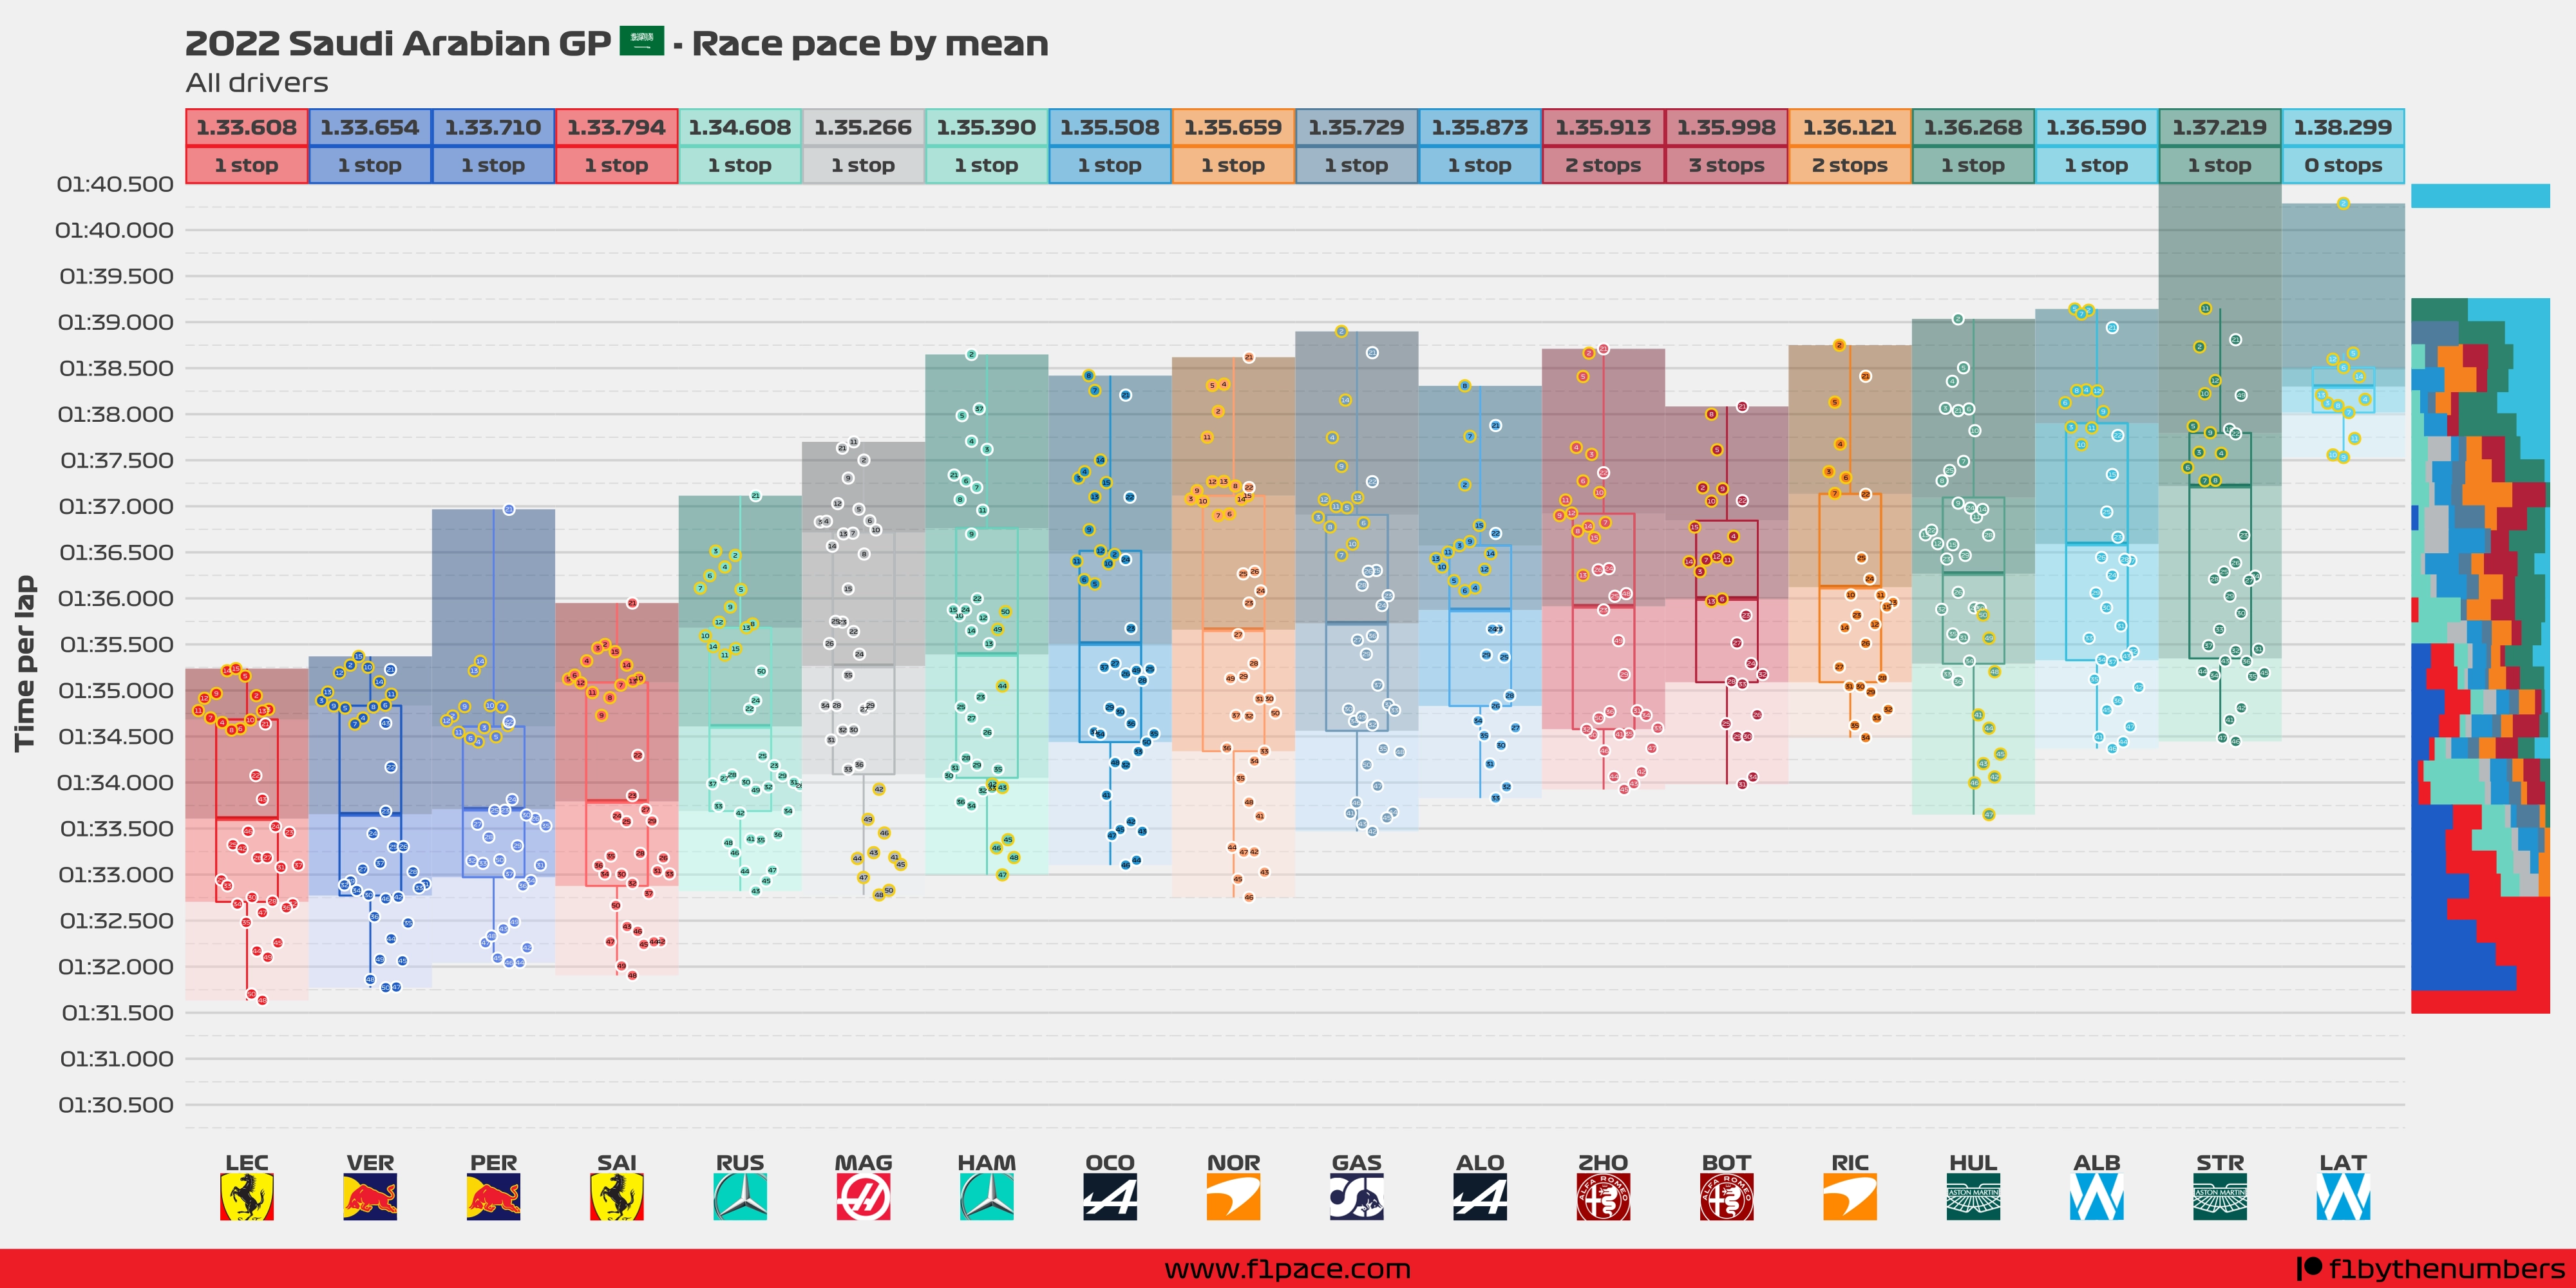 Race pace: All drivers